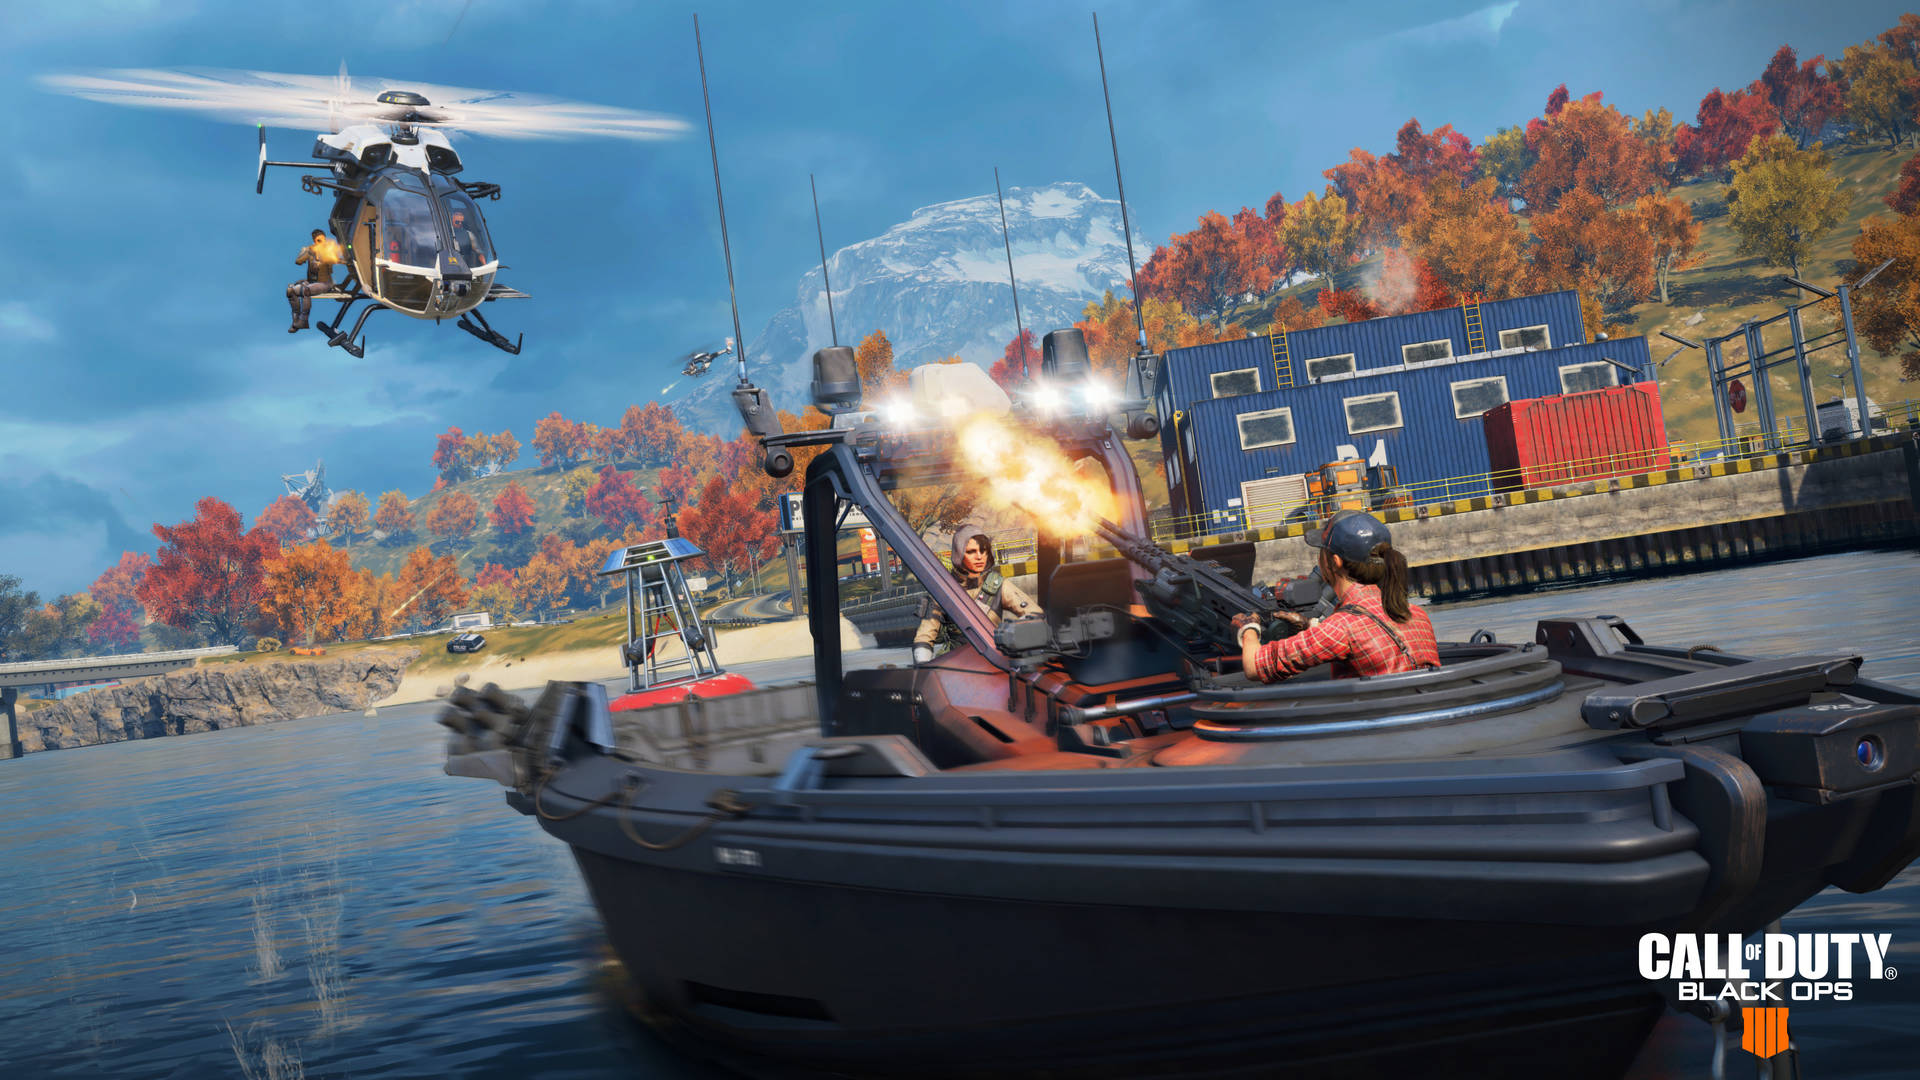 Cod Black Ops 4 Helicopter-boat Chase Background